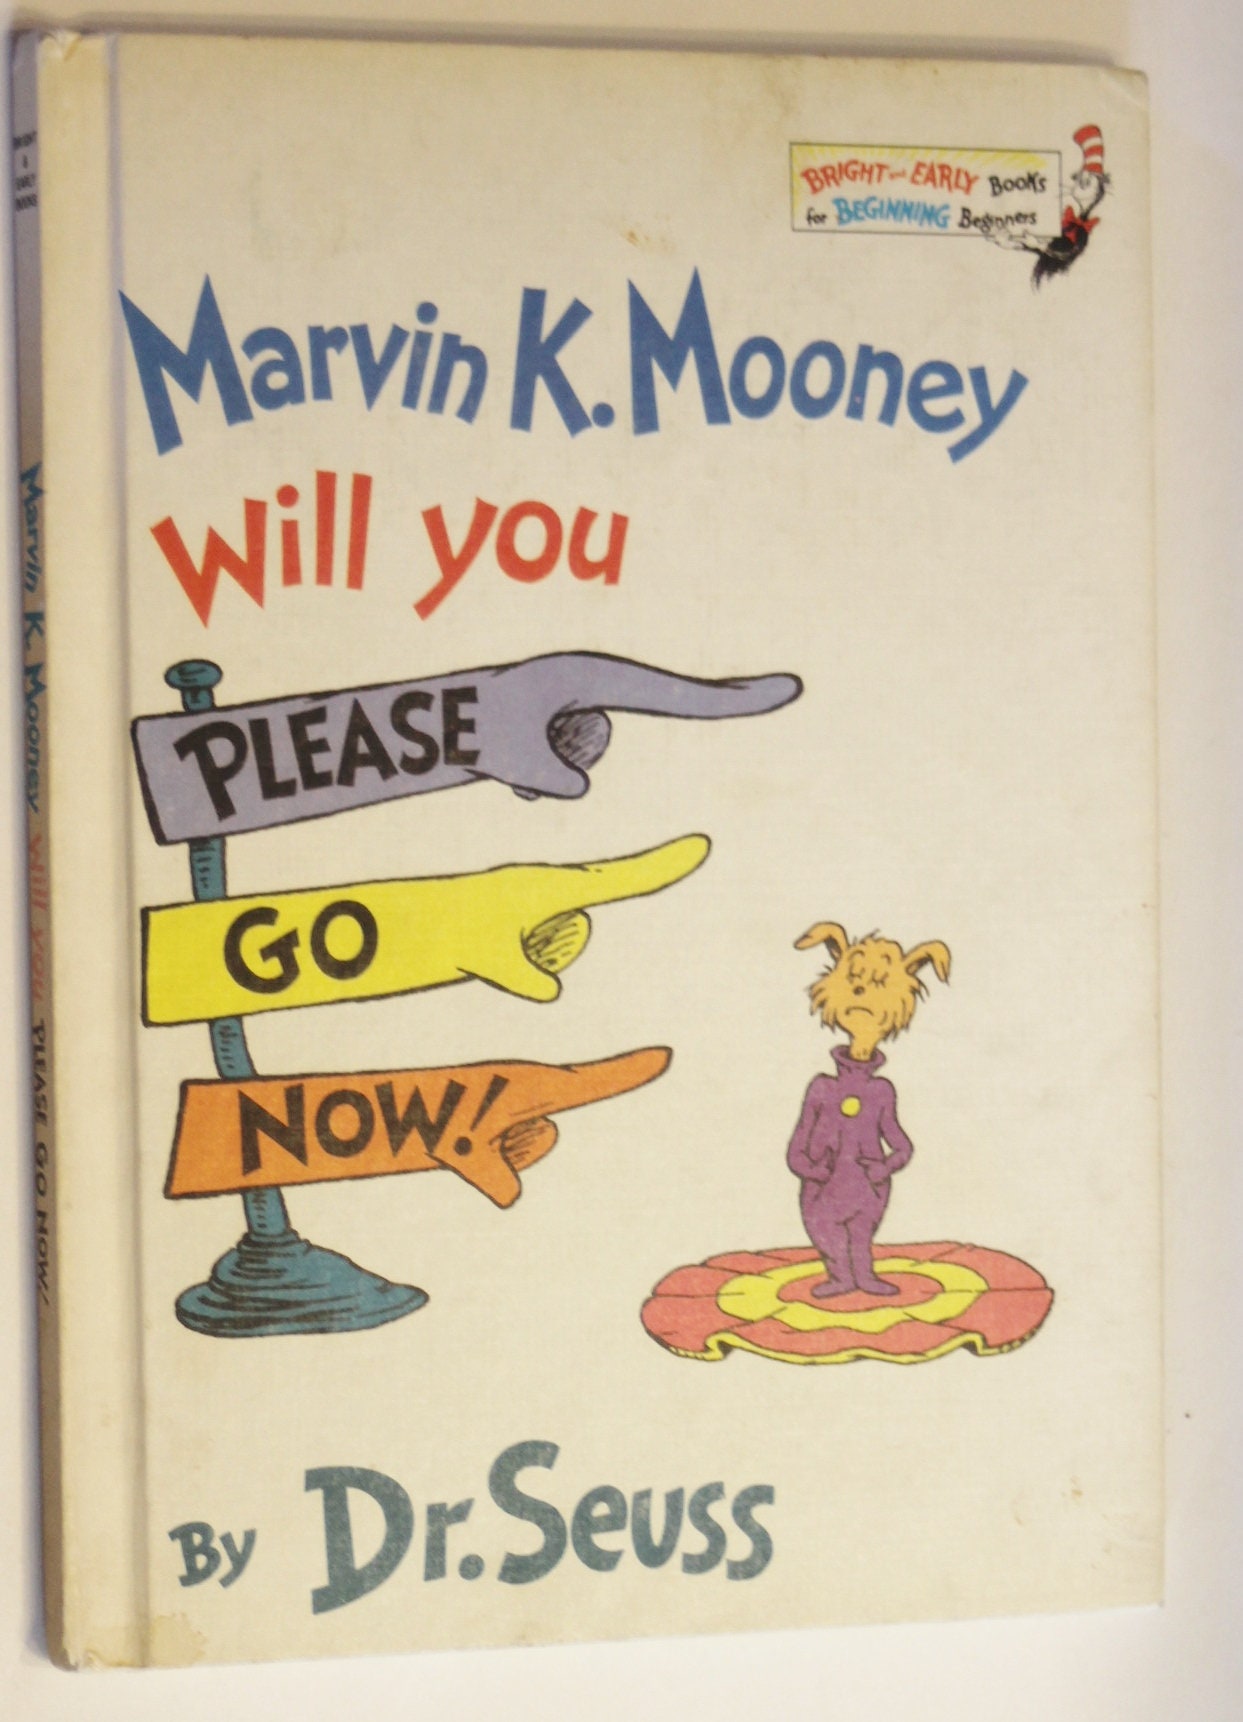 1972 Dr. Suess Book: Marvin K. Mooney Will You Please Go Now | Etsy